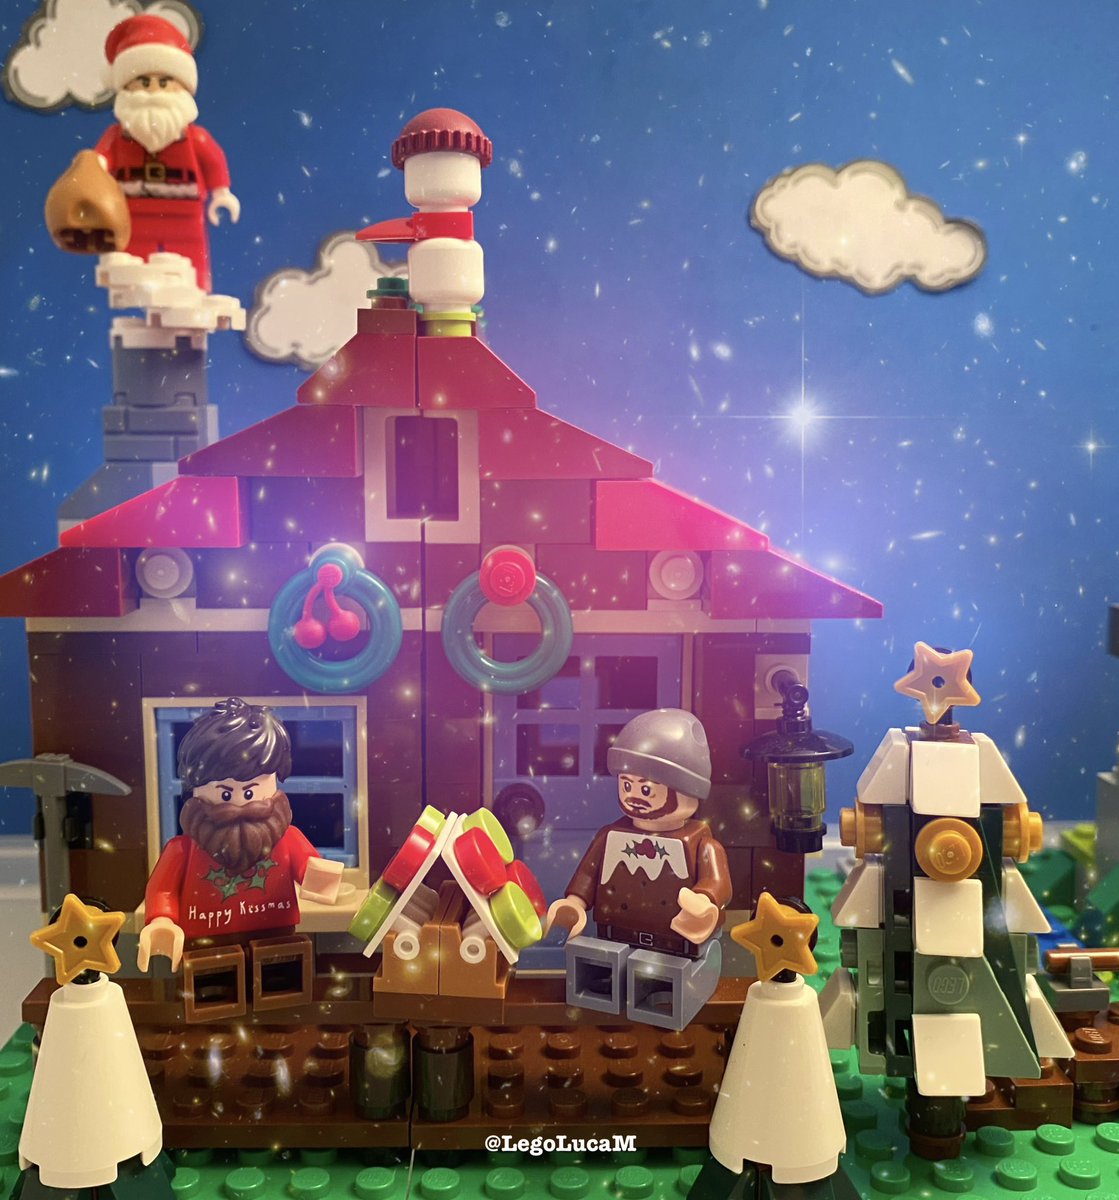 Wishing a peaceful Christmas to all who celebrate. 

With love to all and with huge thanks for your friendship. 

#LucaMarinelli #AlessandroBorghi #PietroEBruno #LeOttoMontagne #MerryChristmas #BuonNatale #Lego #LegoMinifigs #Legography